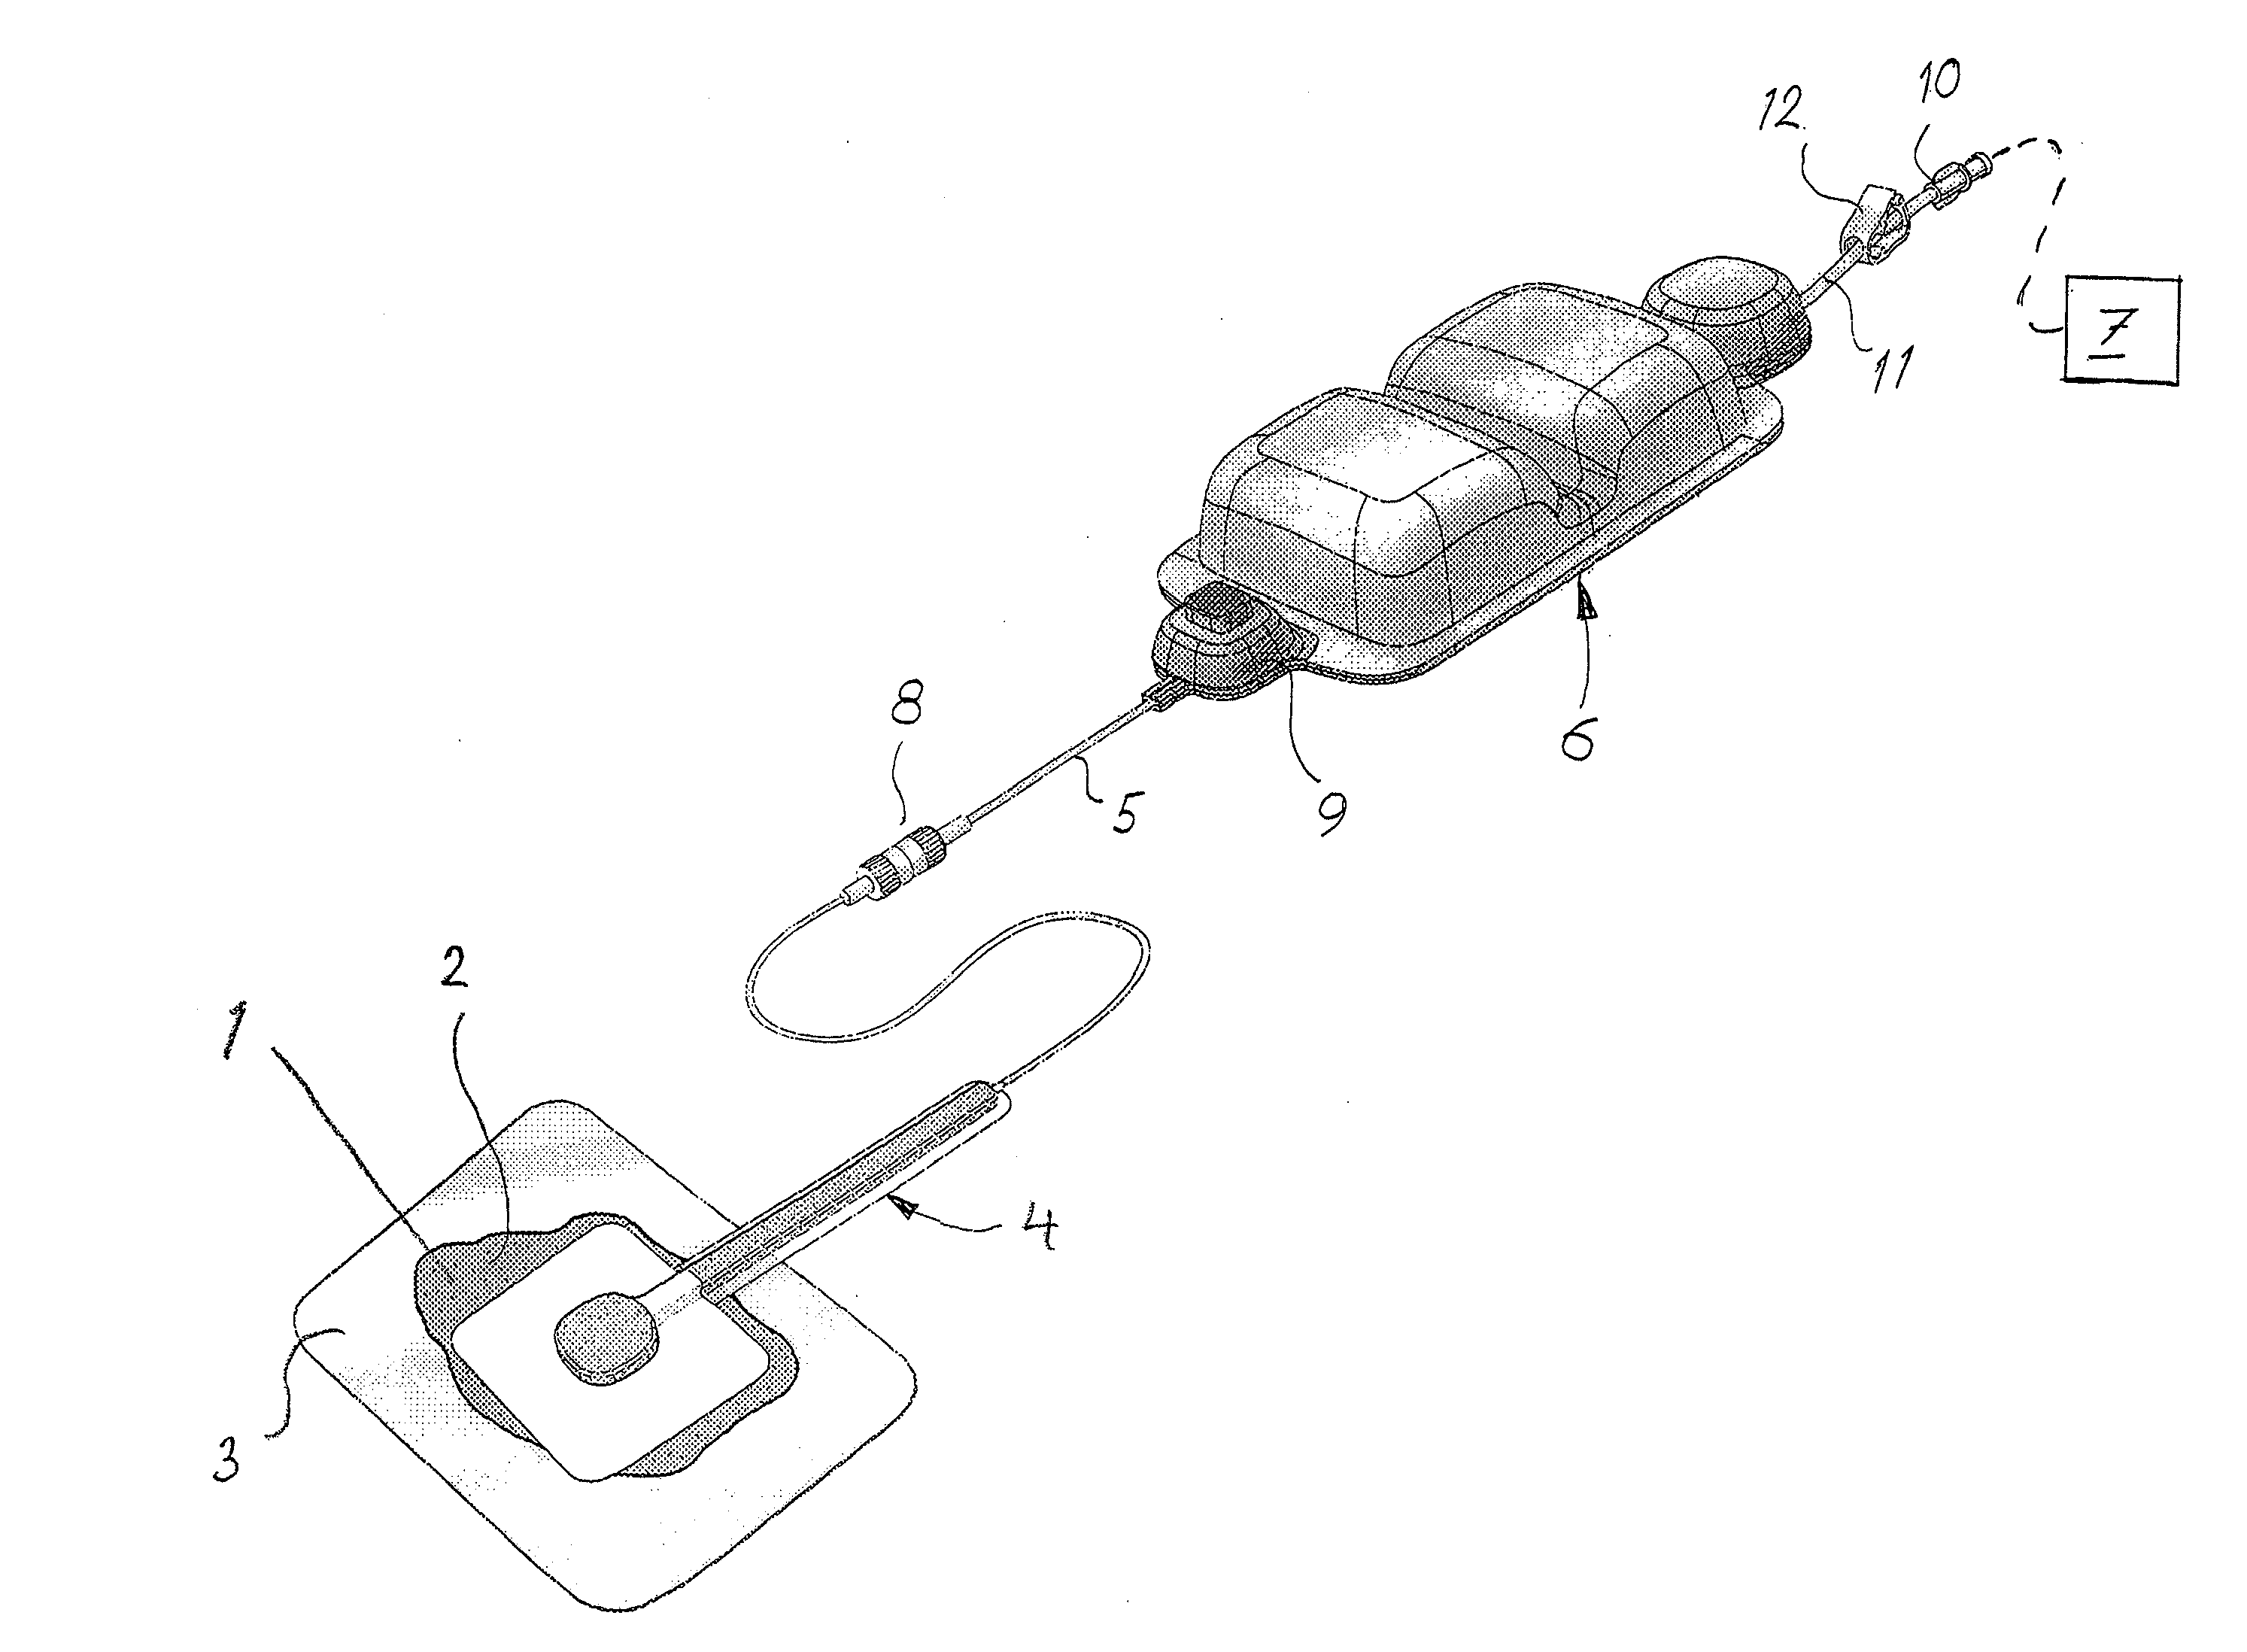 Device for tratment of wound using reduced pressure